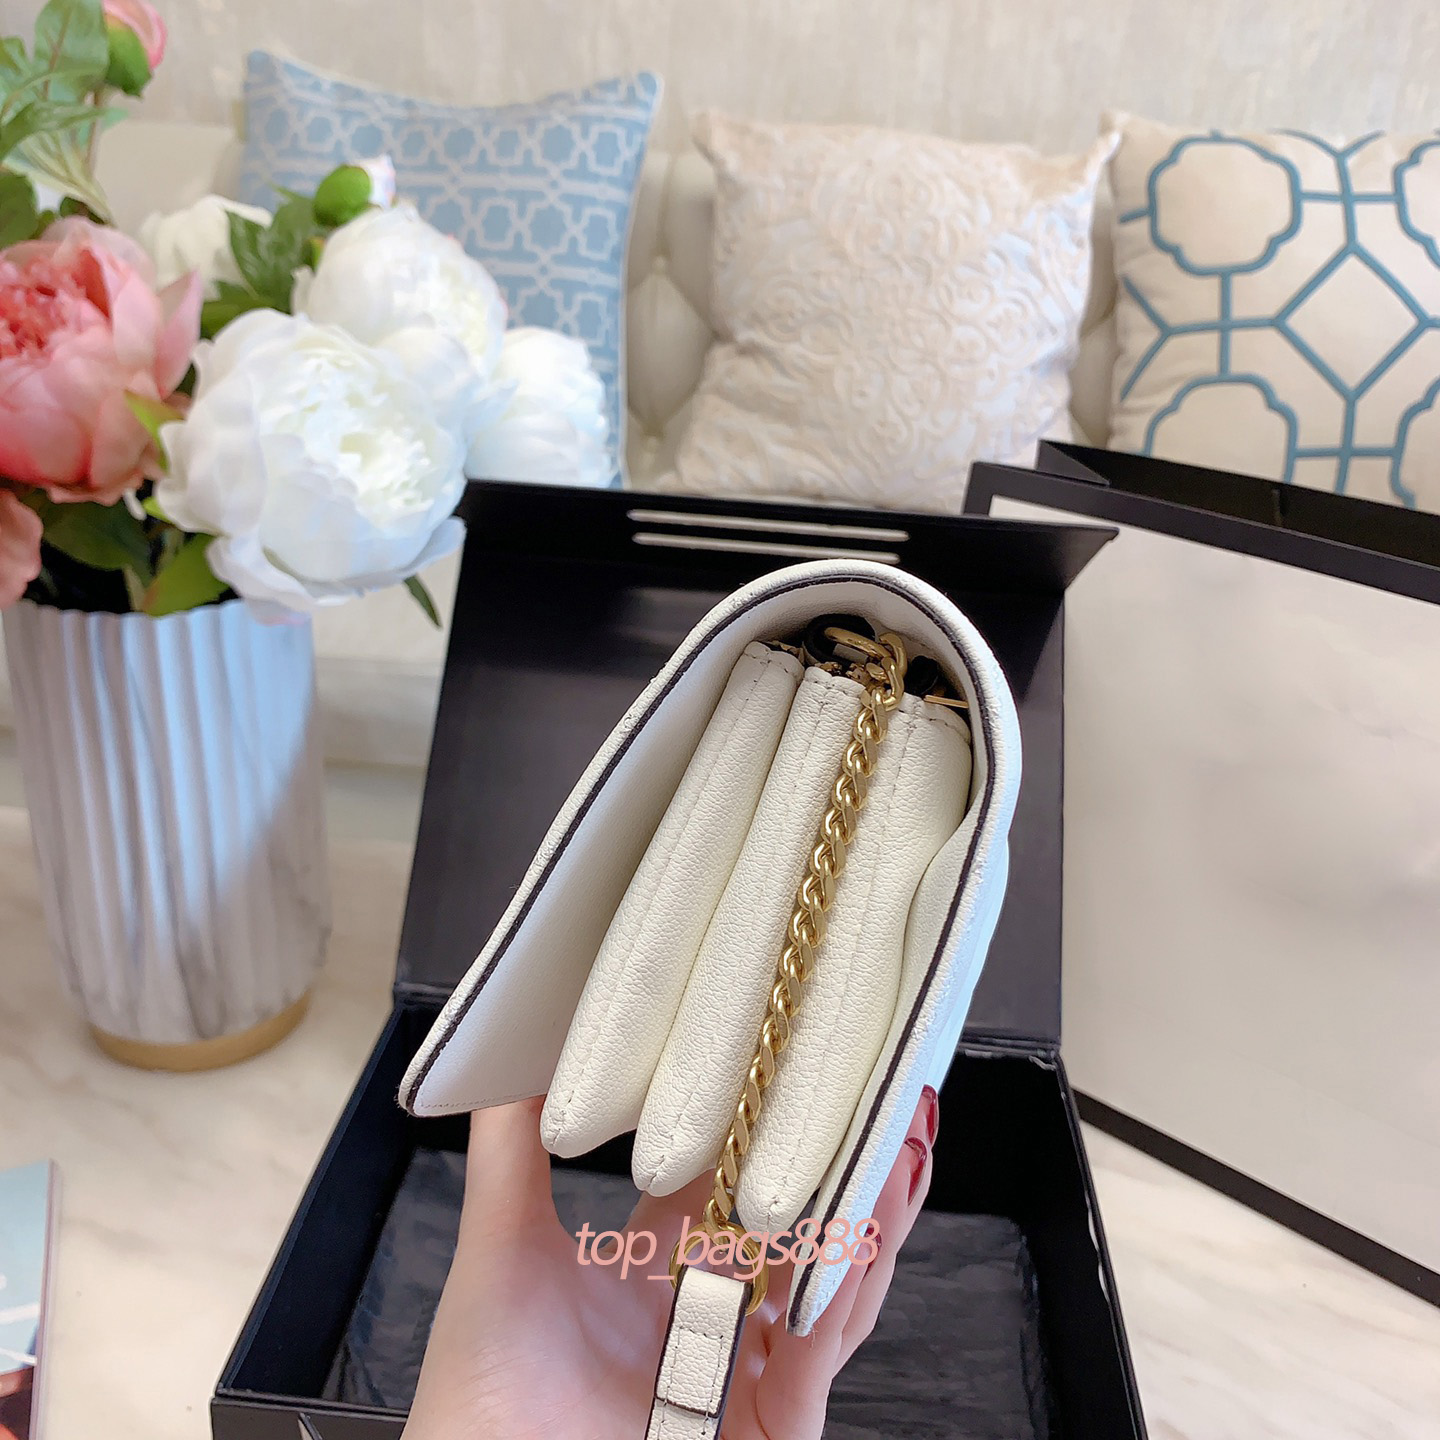 

2021 women fashion ladies handbags purses camera bag white leather diamond chevron quilted wallet on chain flap shoulder crossbody high quality hand bags, Contact us